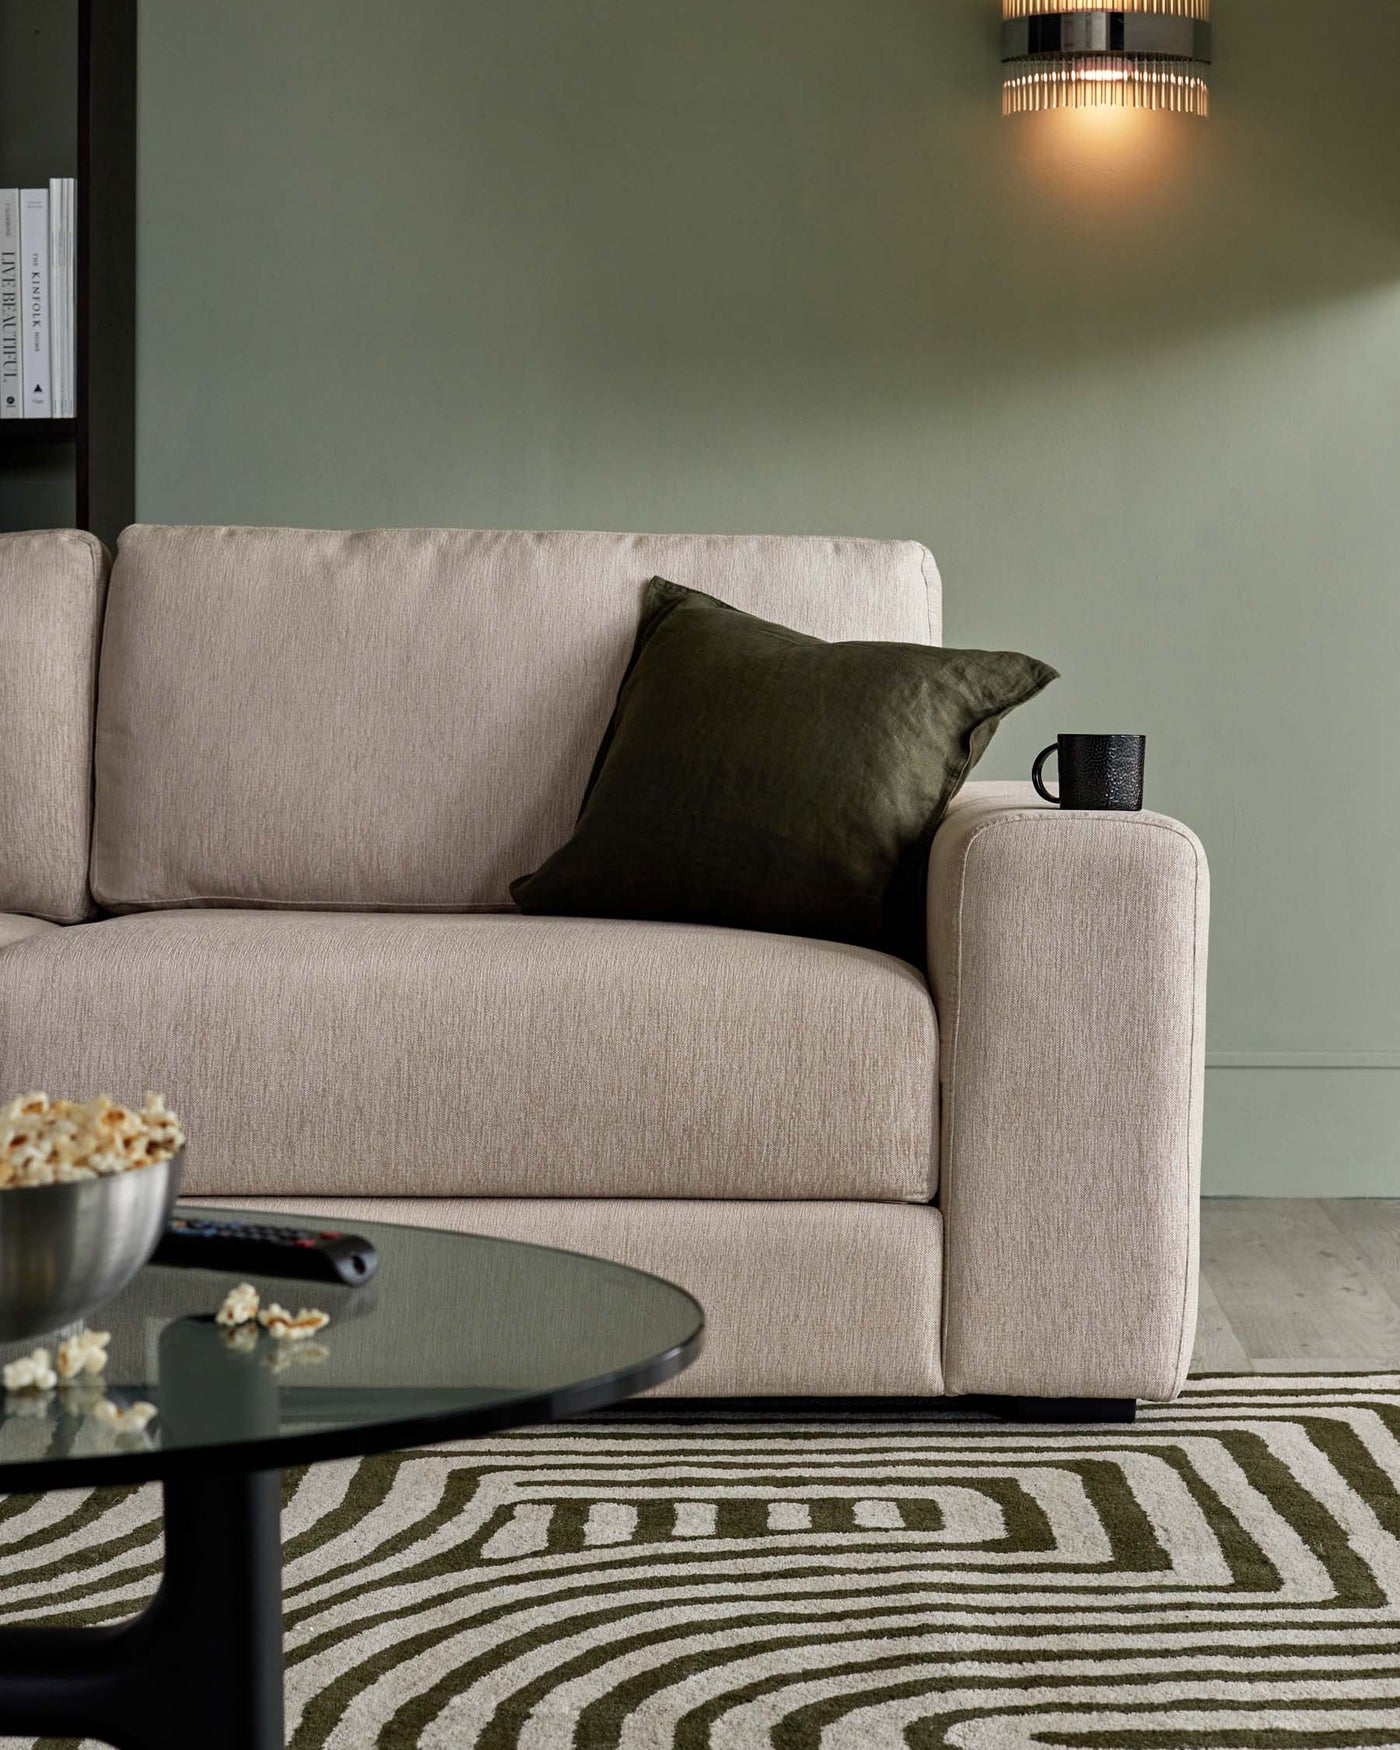 Modern beige fabric sofa with clean lines, featuring plush cushioning, a dark green accent pillow, and a black cylindrical side table topped with a black mug. In the foreground, a round black coffee table presents contrast against a patterned grey and green area rug.